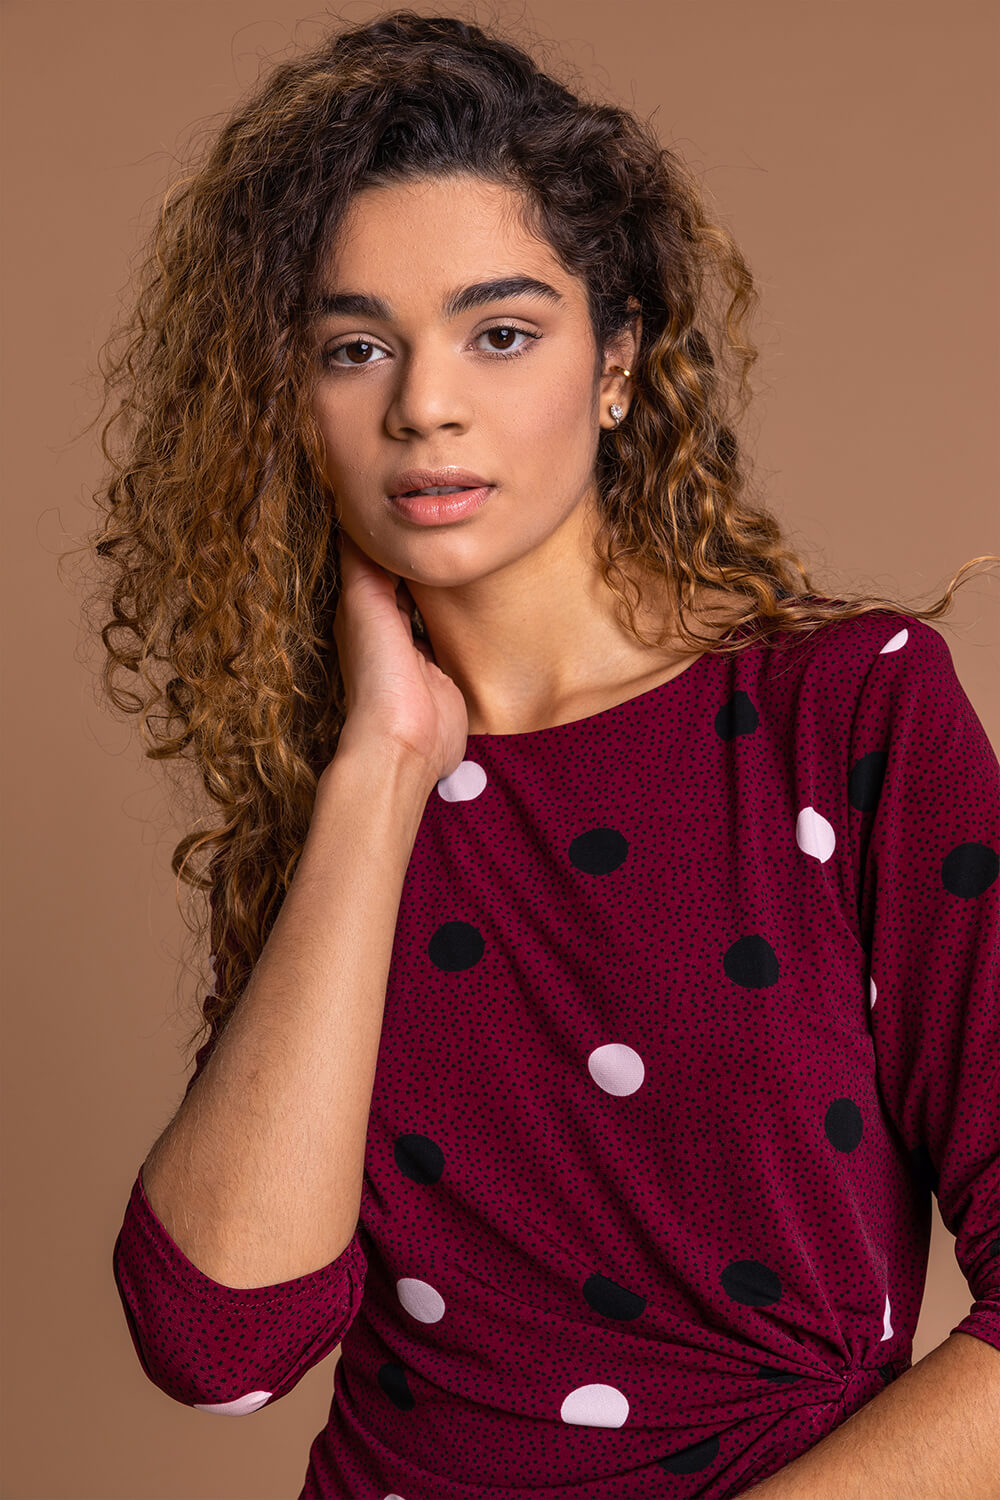 Bordeaux Polka Dot Ruched 3/4 Sleeve Jersey Top, Image 4 of 5